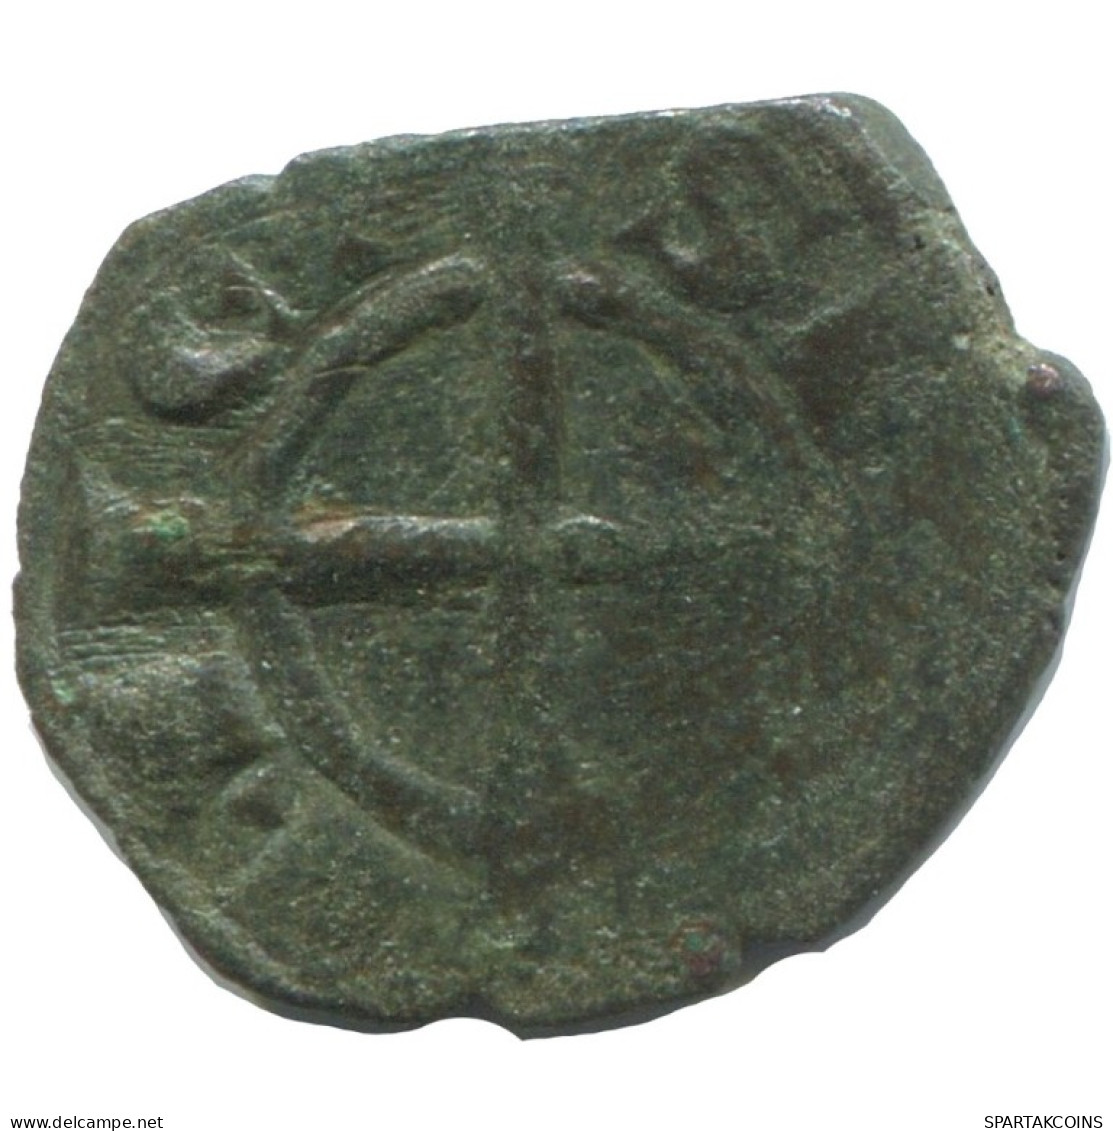 CRUSADER CROSS Authentic Original MEDIEVAL EUROPEAN Coin 0.8g/15mm #AC364.8.U.A - Other - Europe